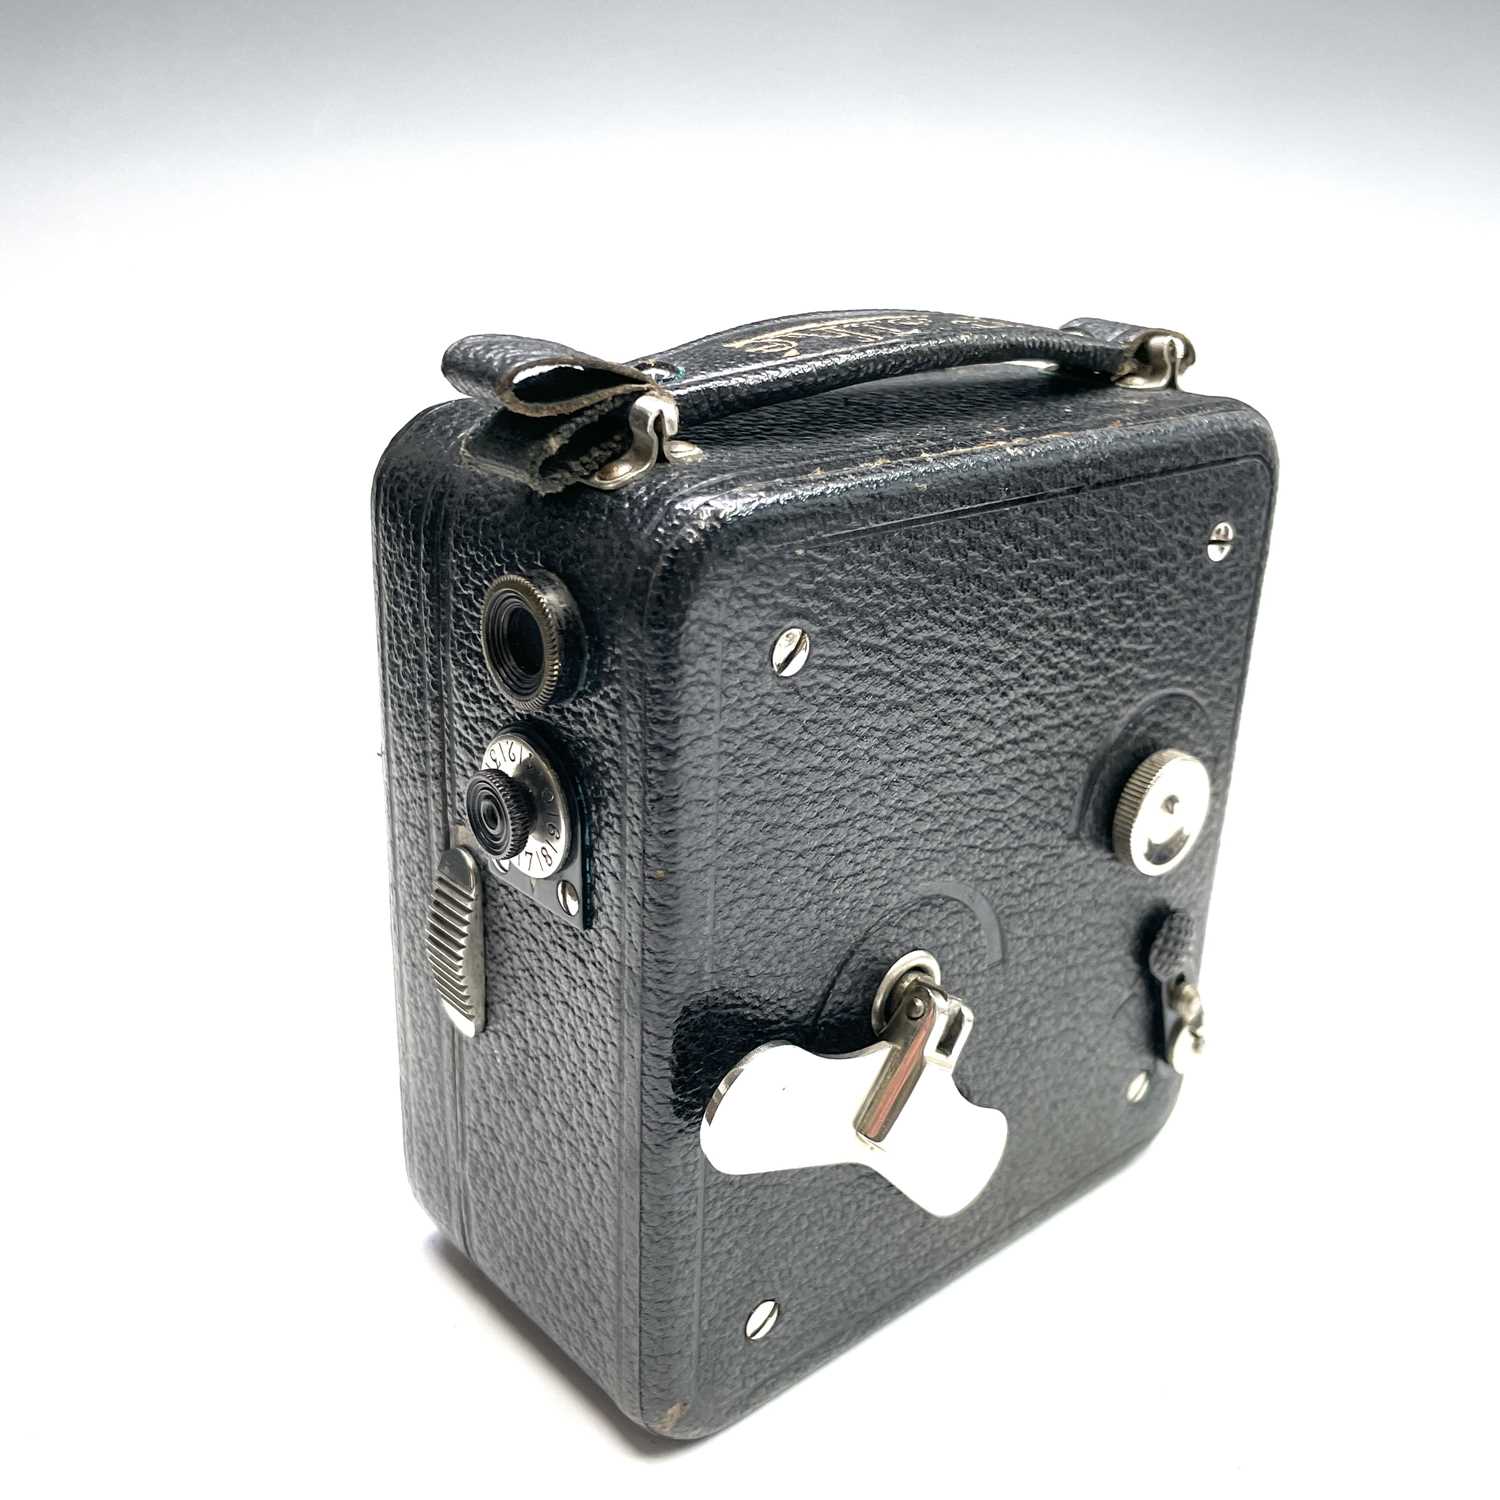 A collection of cameras and cinecameras including a Pathe Motocamera in leather case with - Image 5 of 10